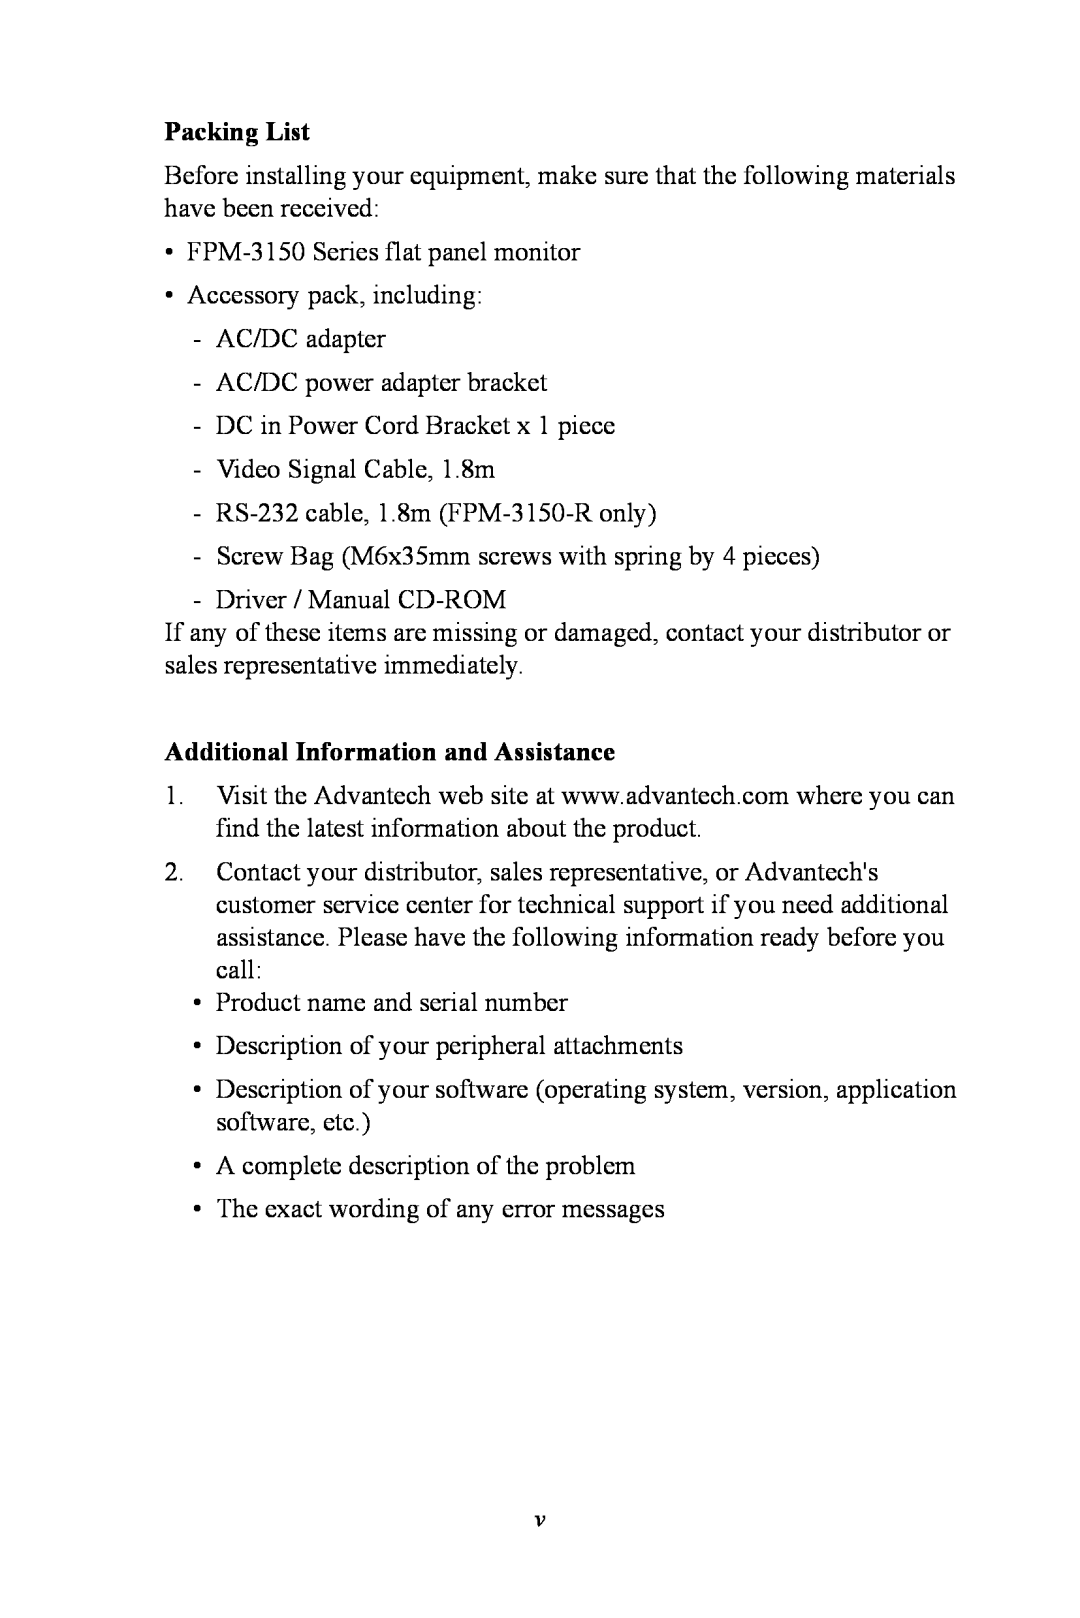 Advantech FPM-3150 Series user manual Packing List, Additional Information and Assistance 